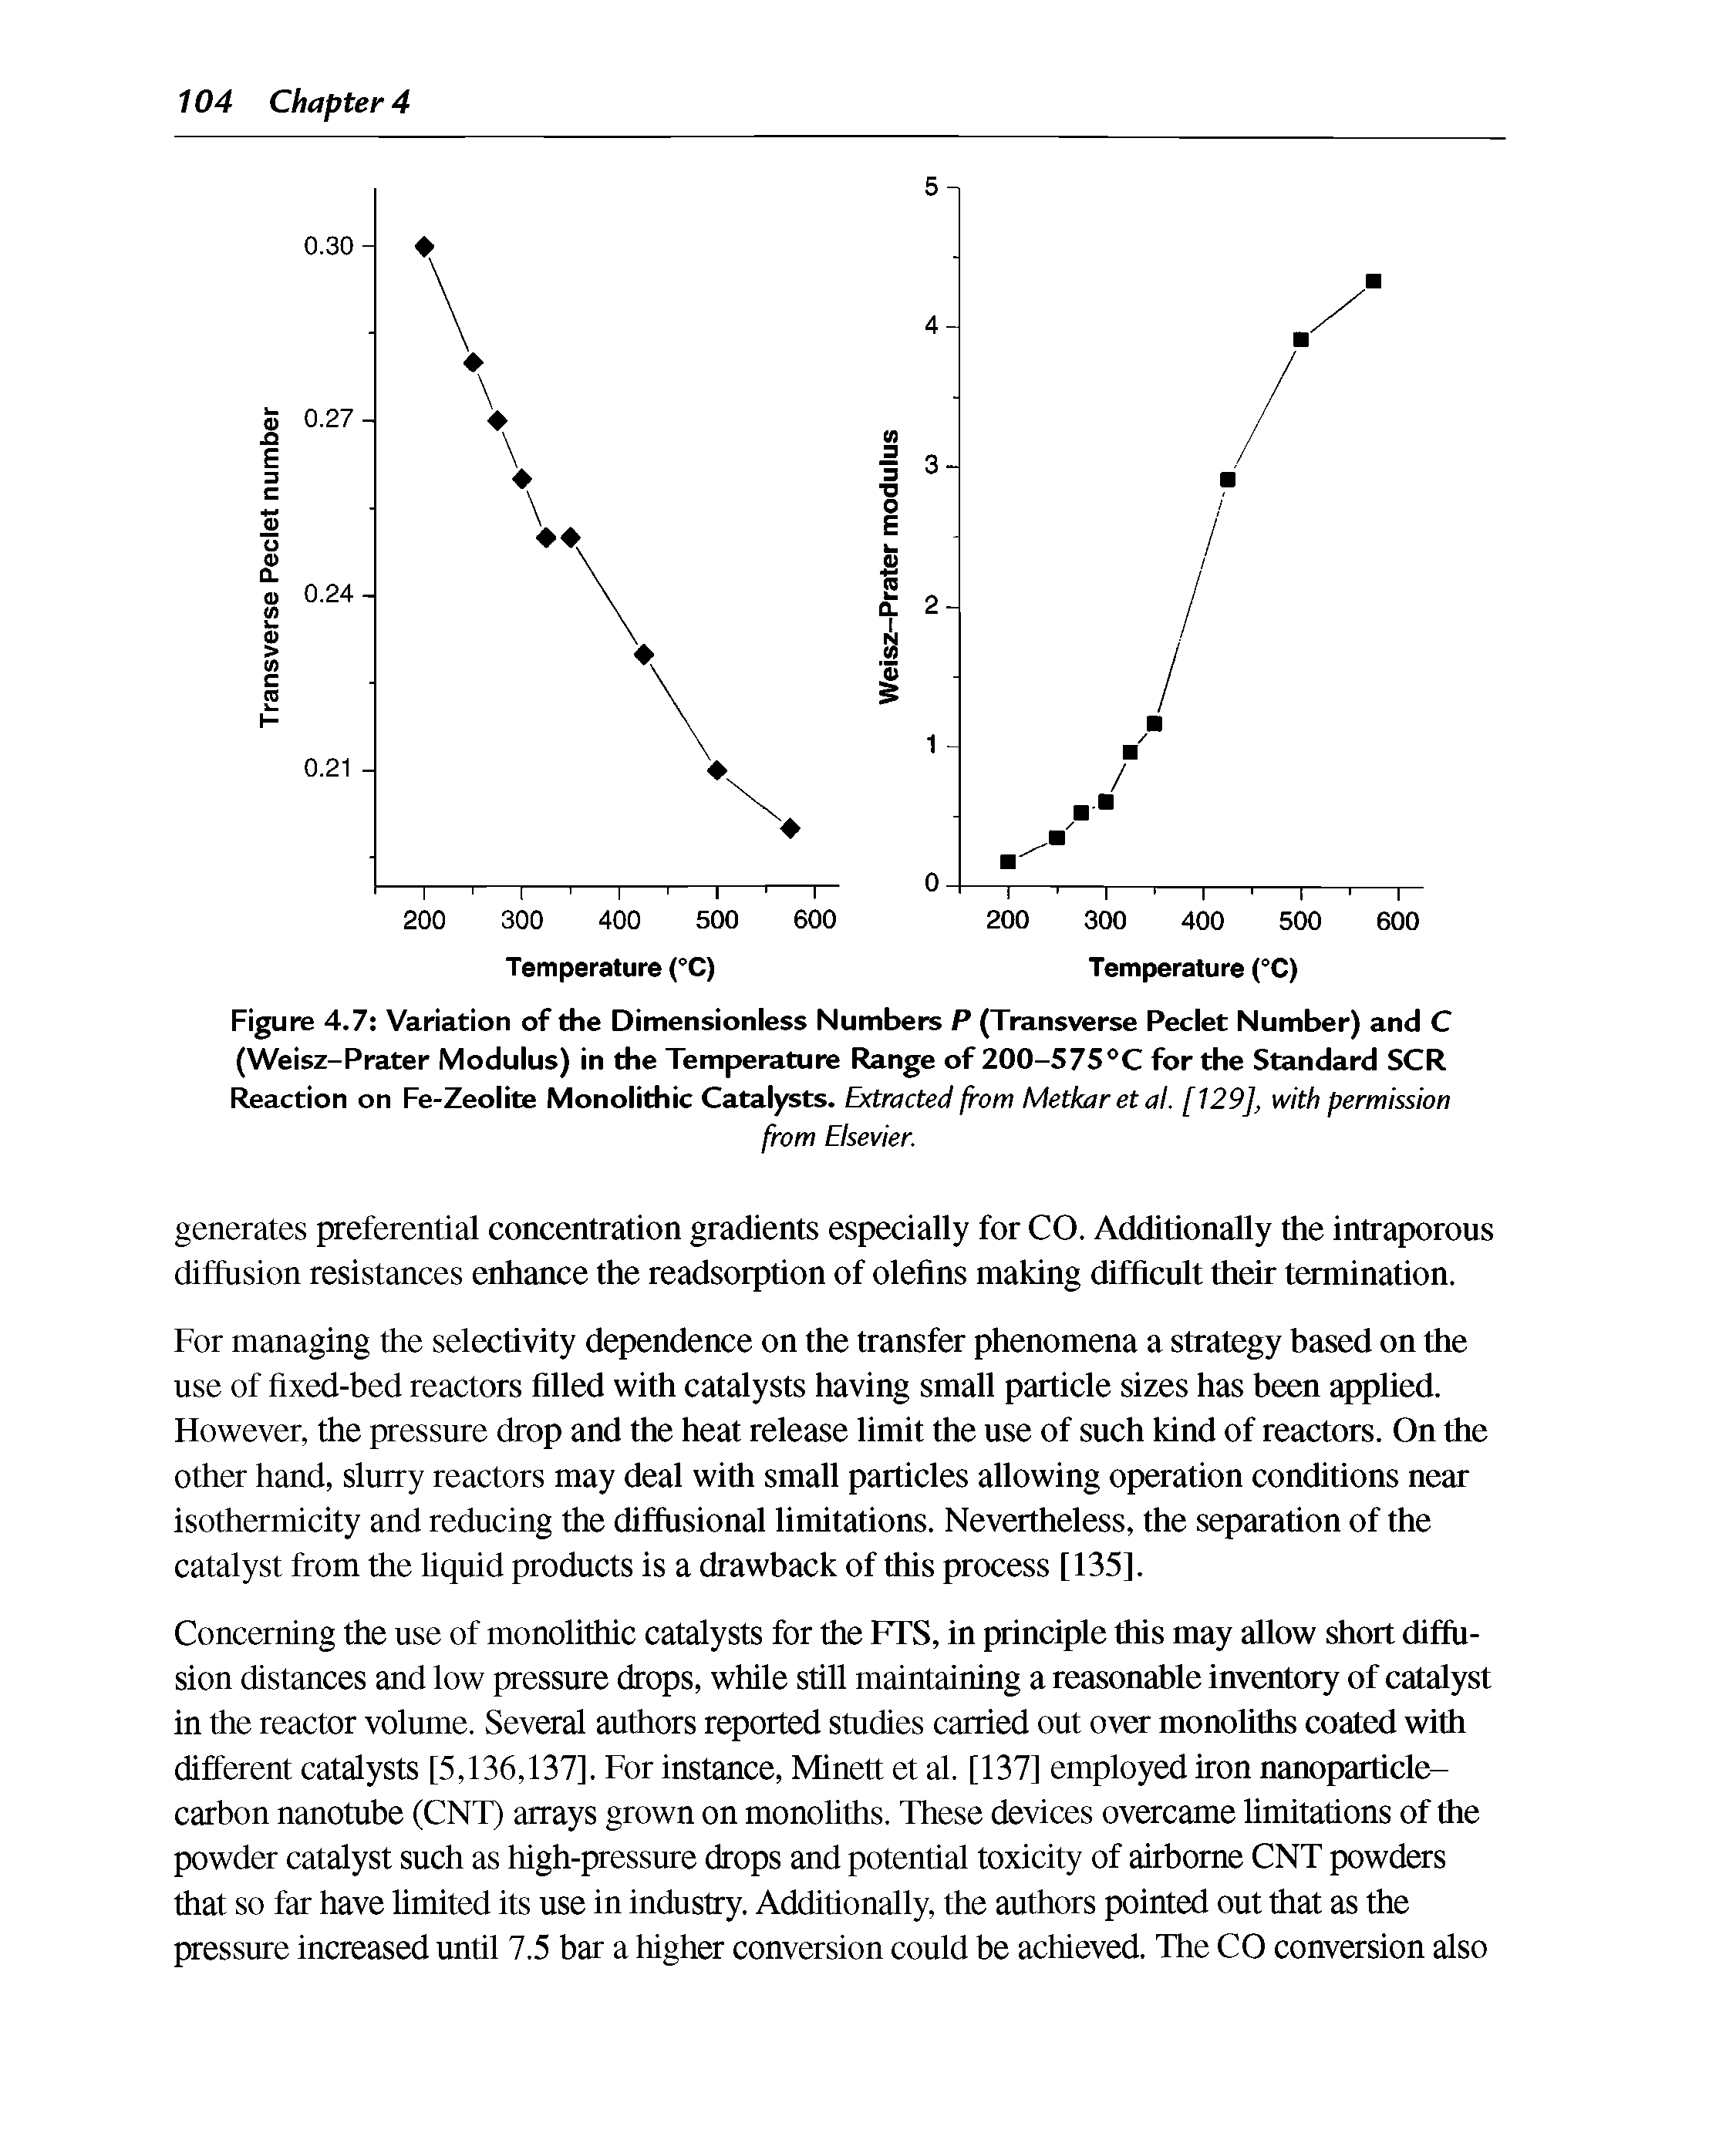 Figure 4.7 Variation of the Dimensionless Numbers P (Transverse Peclet Number) and C (Weisz-Prater Modulus) in the Temperature Range of 200-575 C for the Standard SCR Reaction on Fe-Zeolite Monolithic Catalysts. Extracted from Metkaretal. [129], with permission...